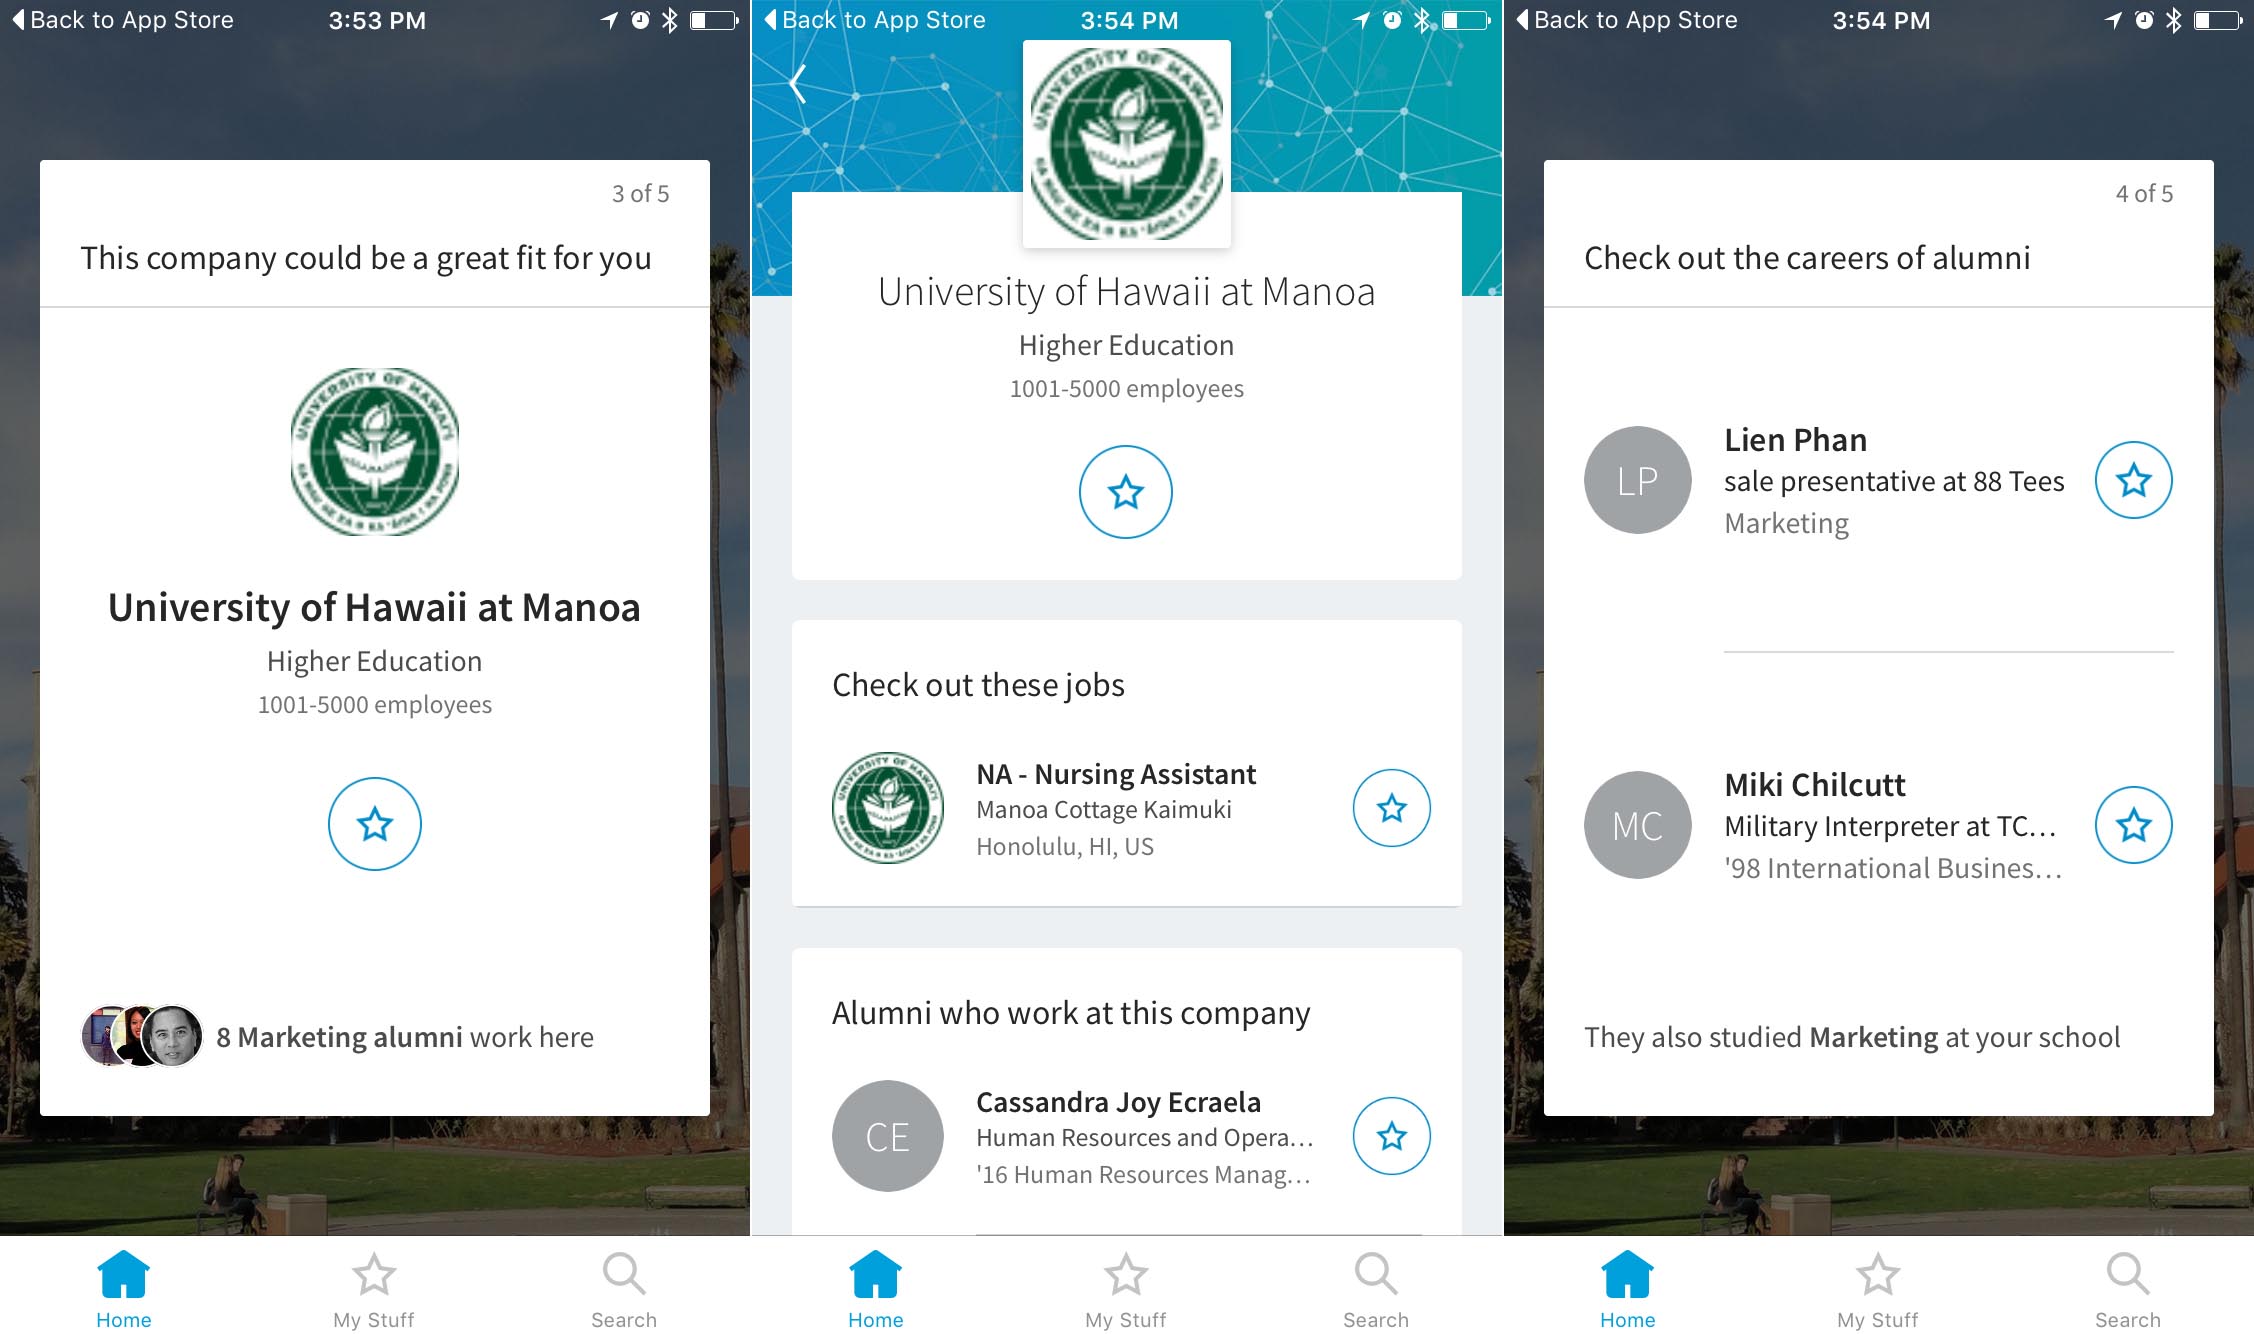 Screenshots of LinkedIn's Students iOS app showing a company you might want to apply for and alumni from your school you should connect with.